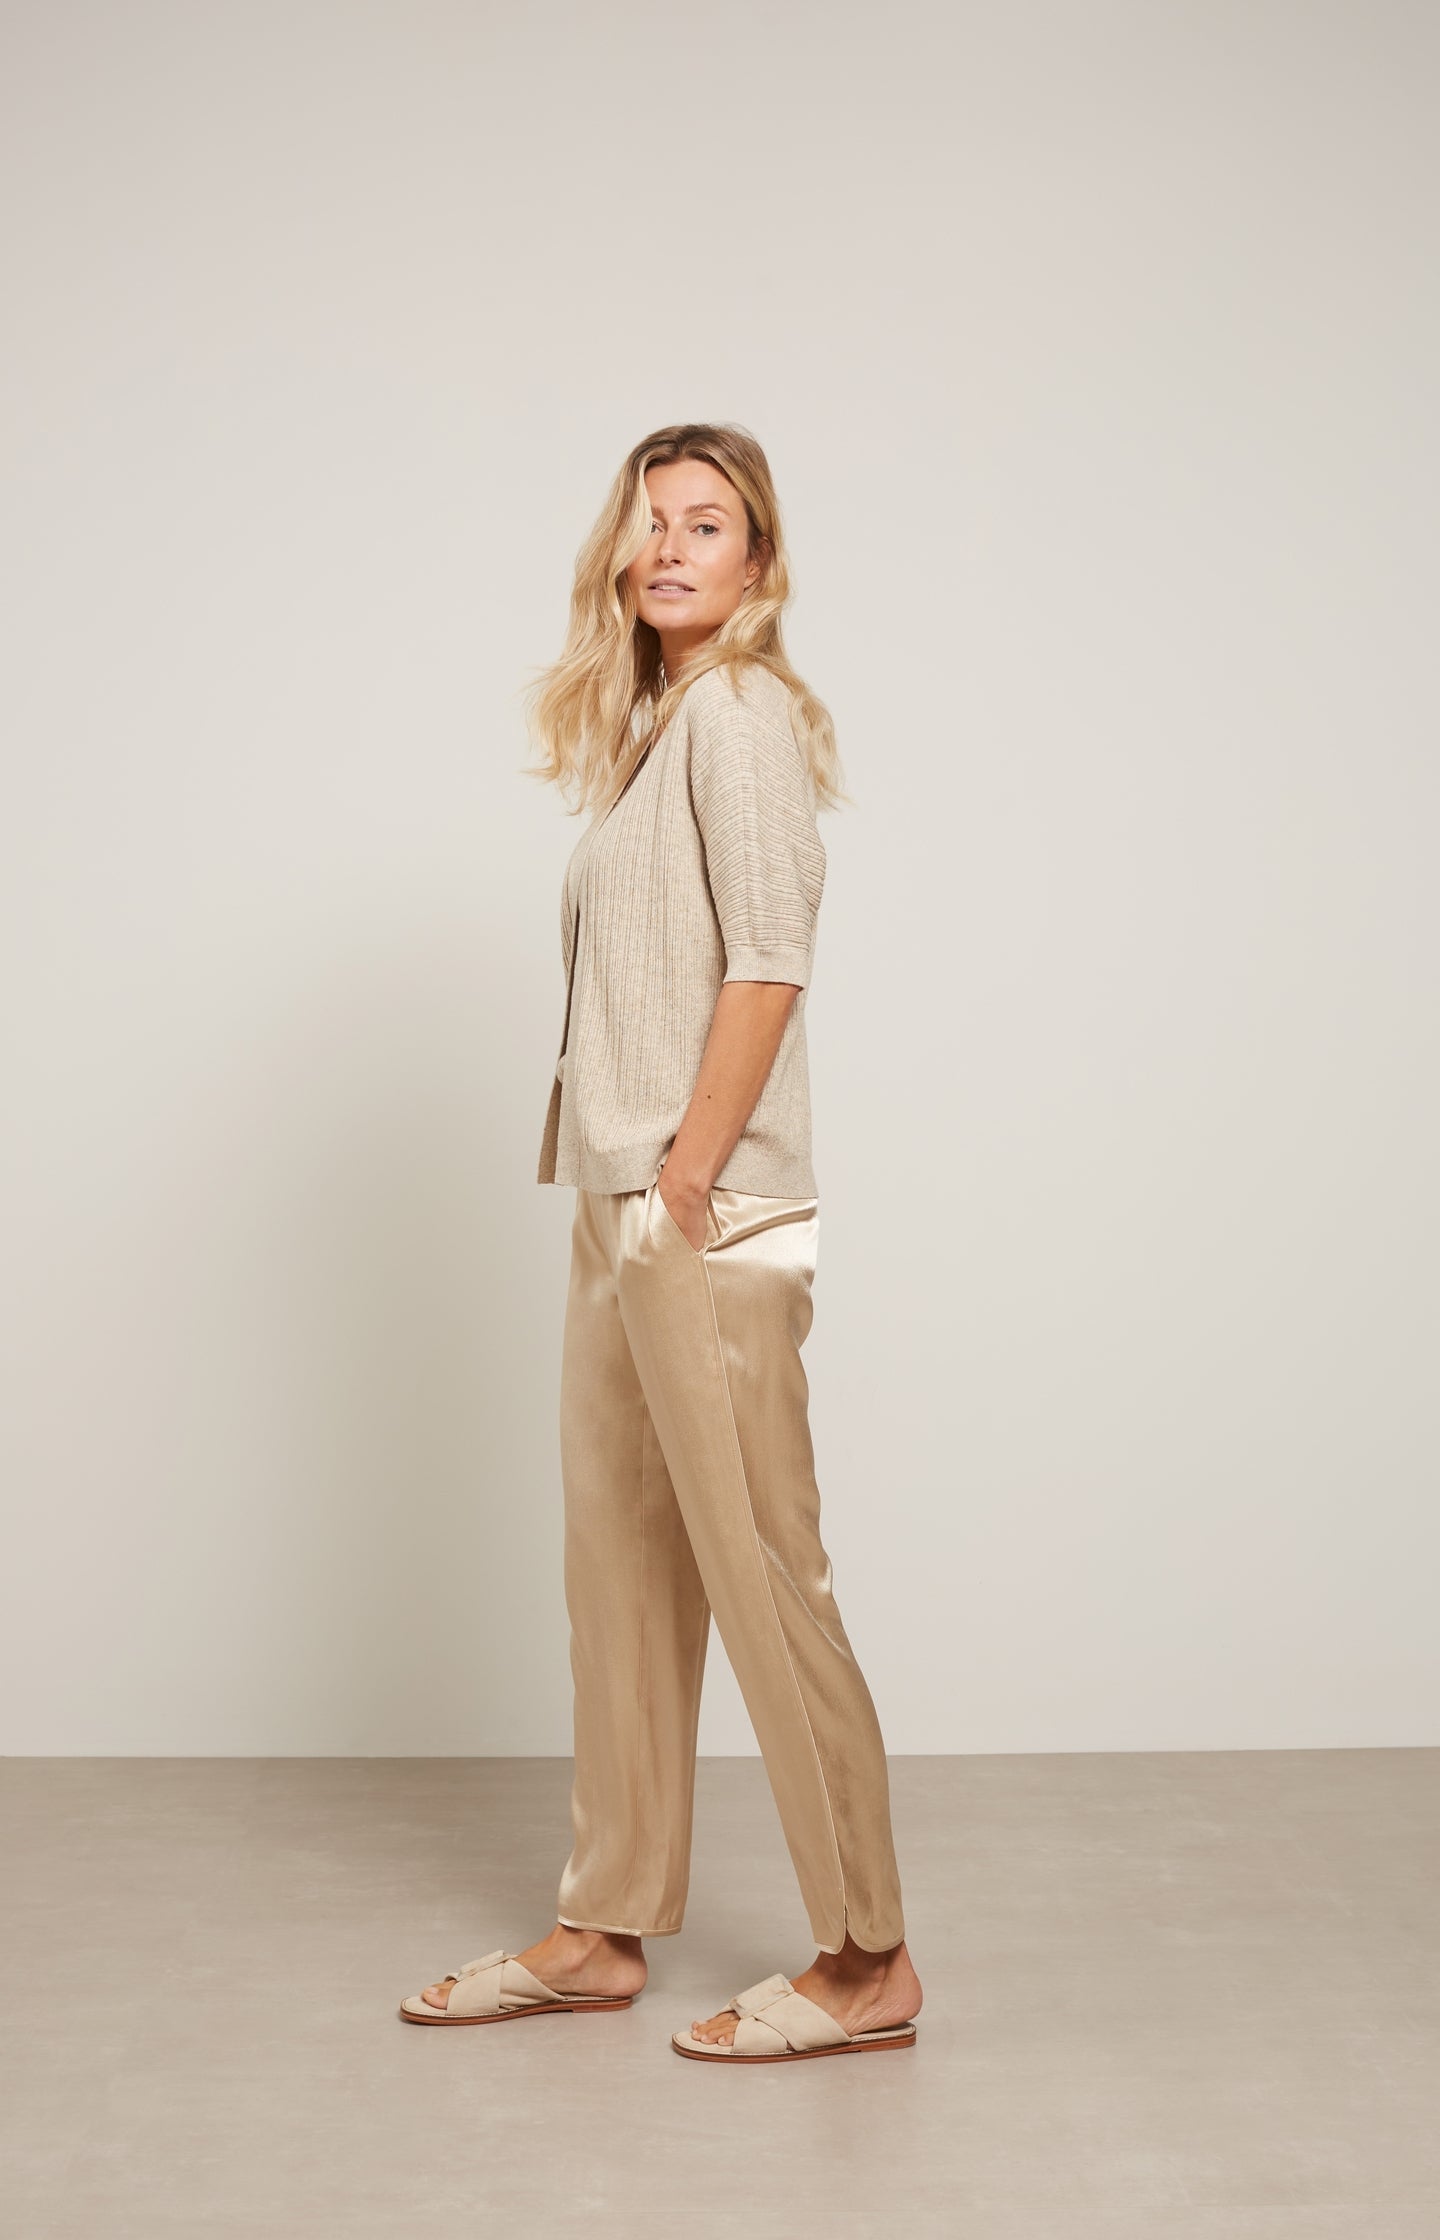 Satin jogging trousers with elastic waist and side pockets